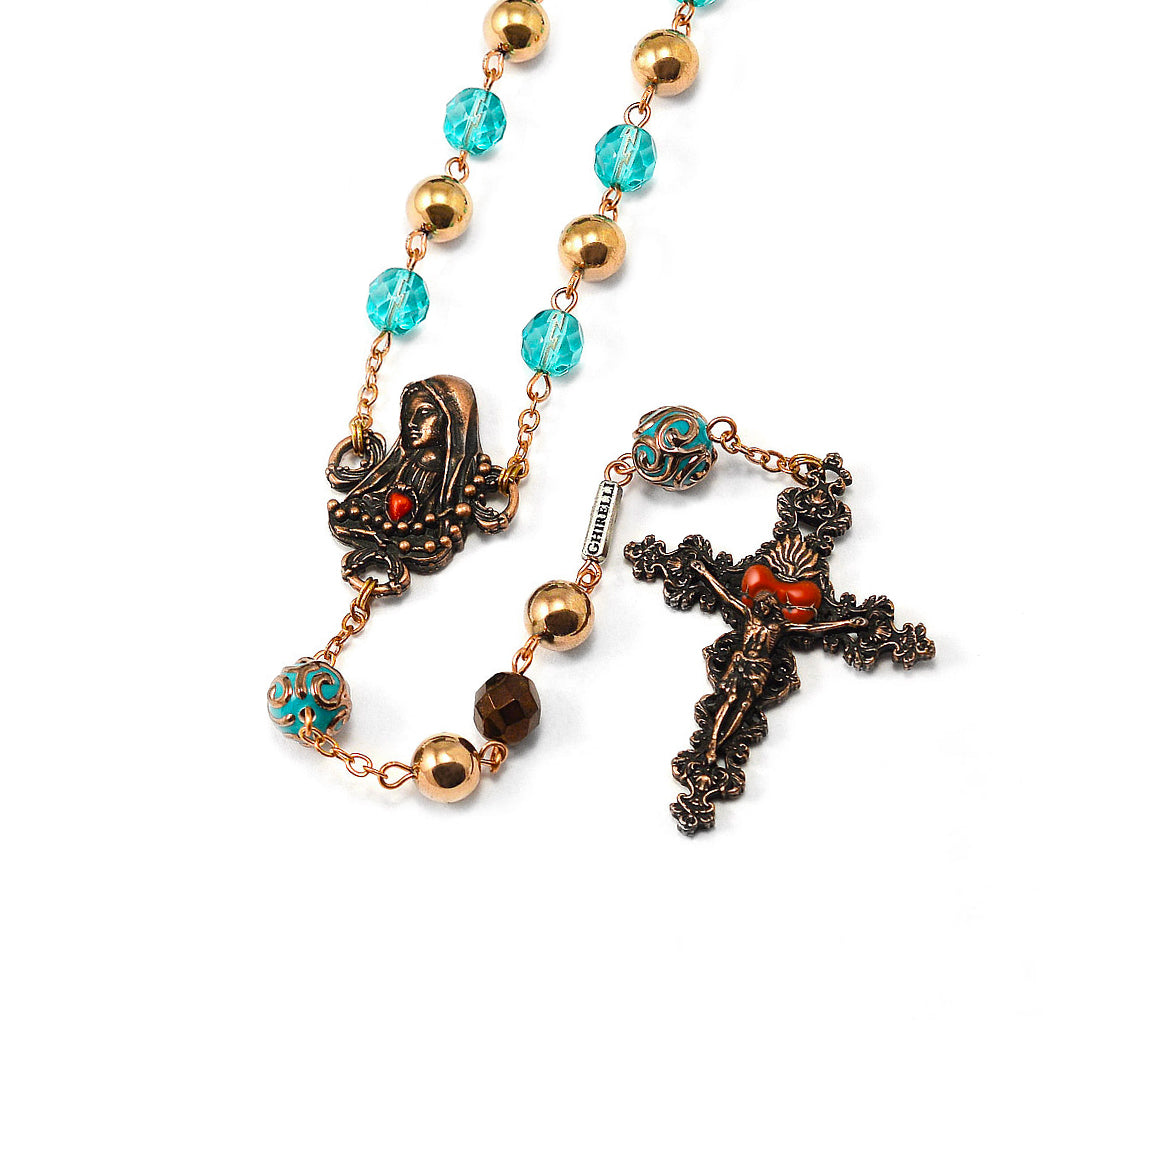 Our Lady of Fatima Rosary with Hematite Beads